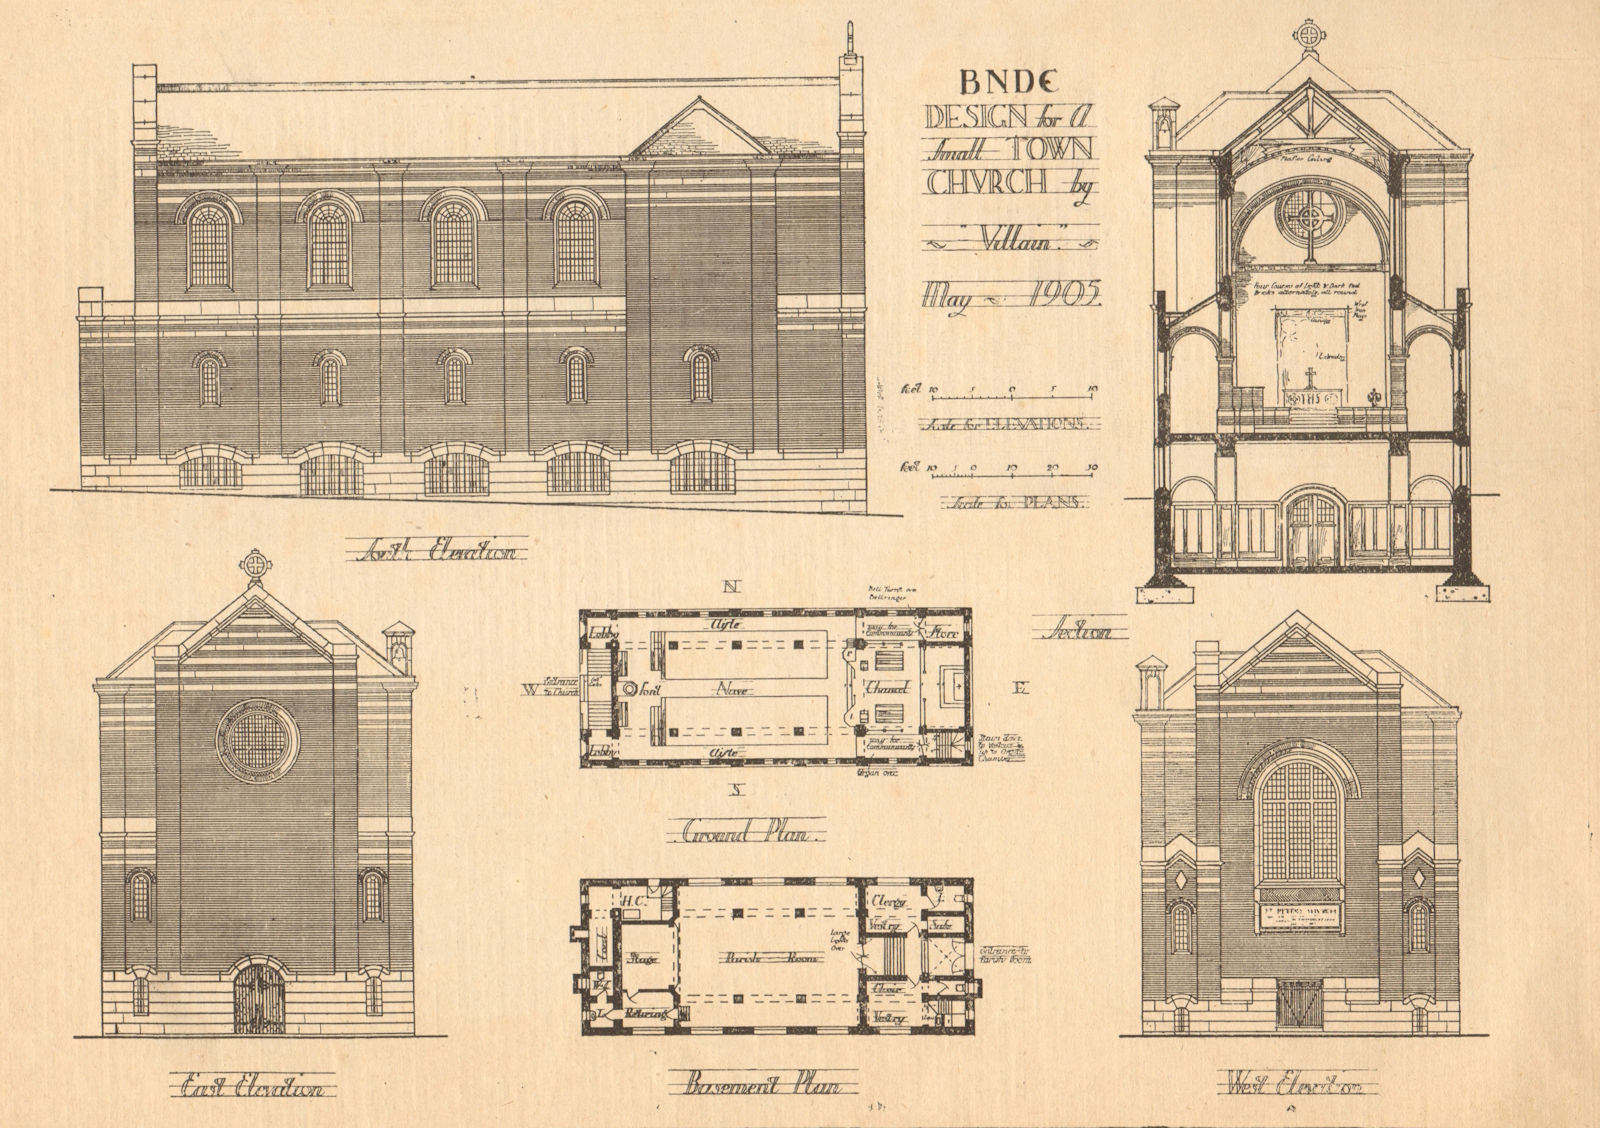 Associate Product Design for a small town church by Villain, May 1905. Plans & elevations 1905